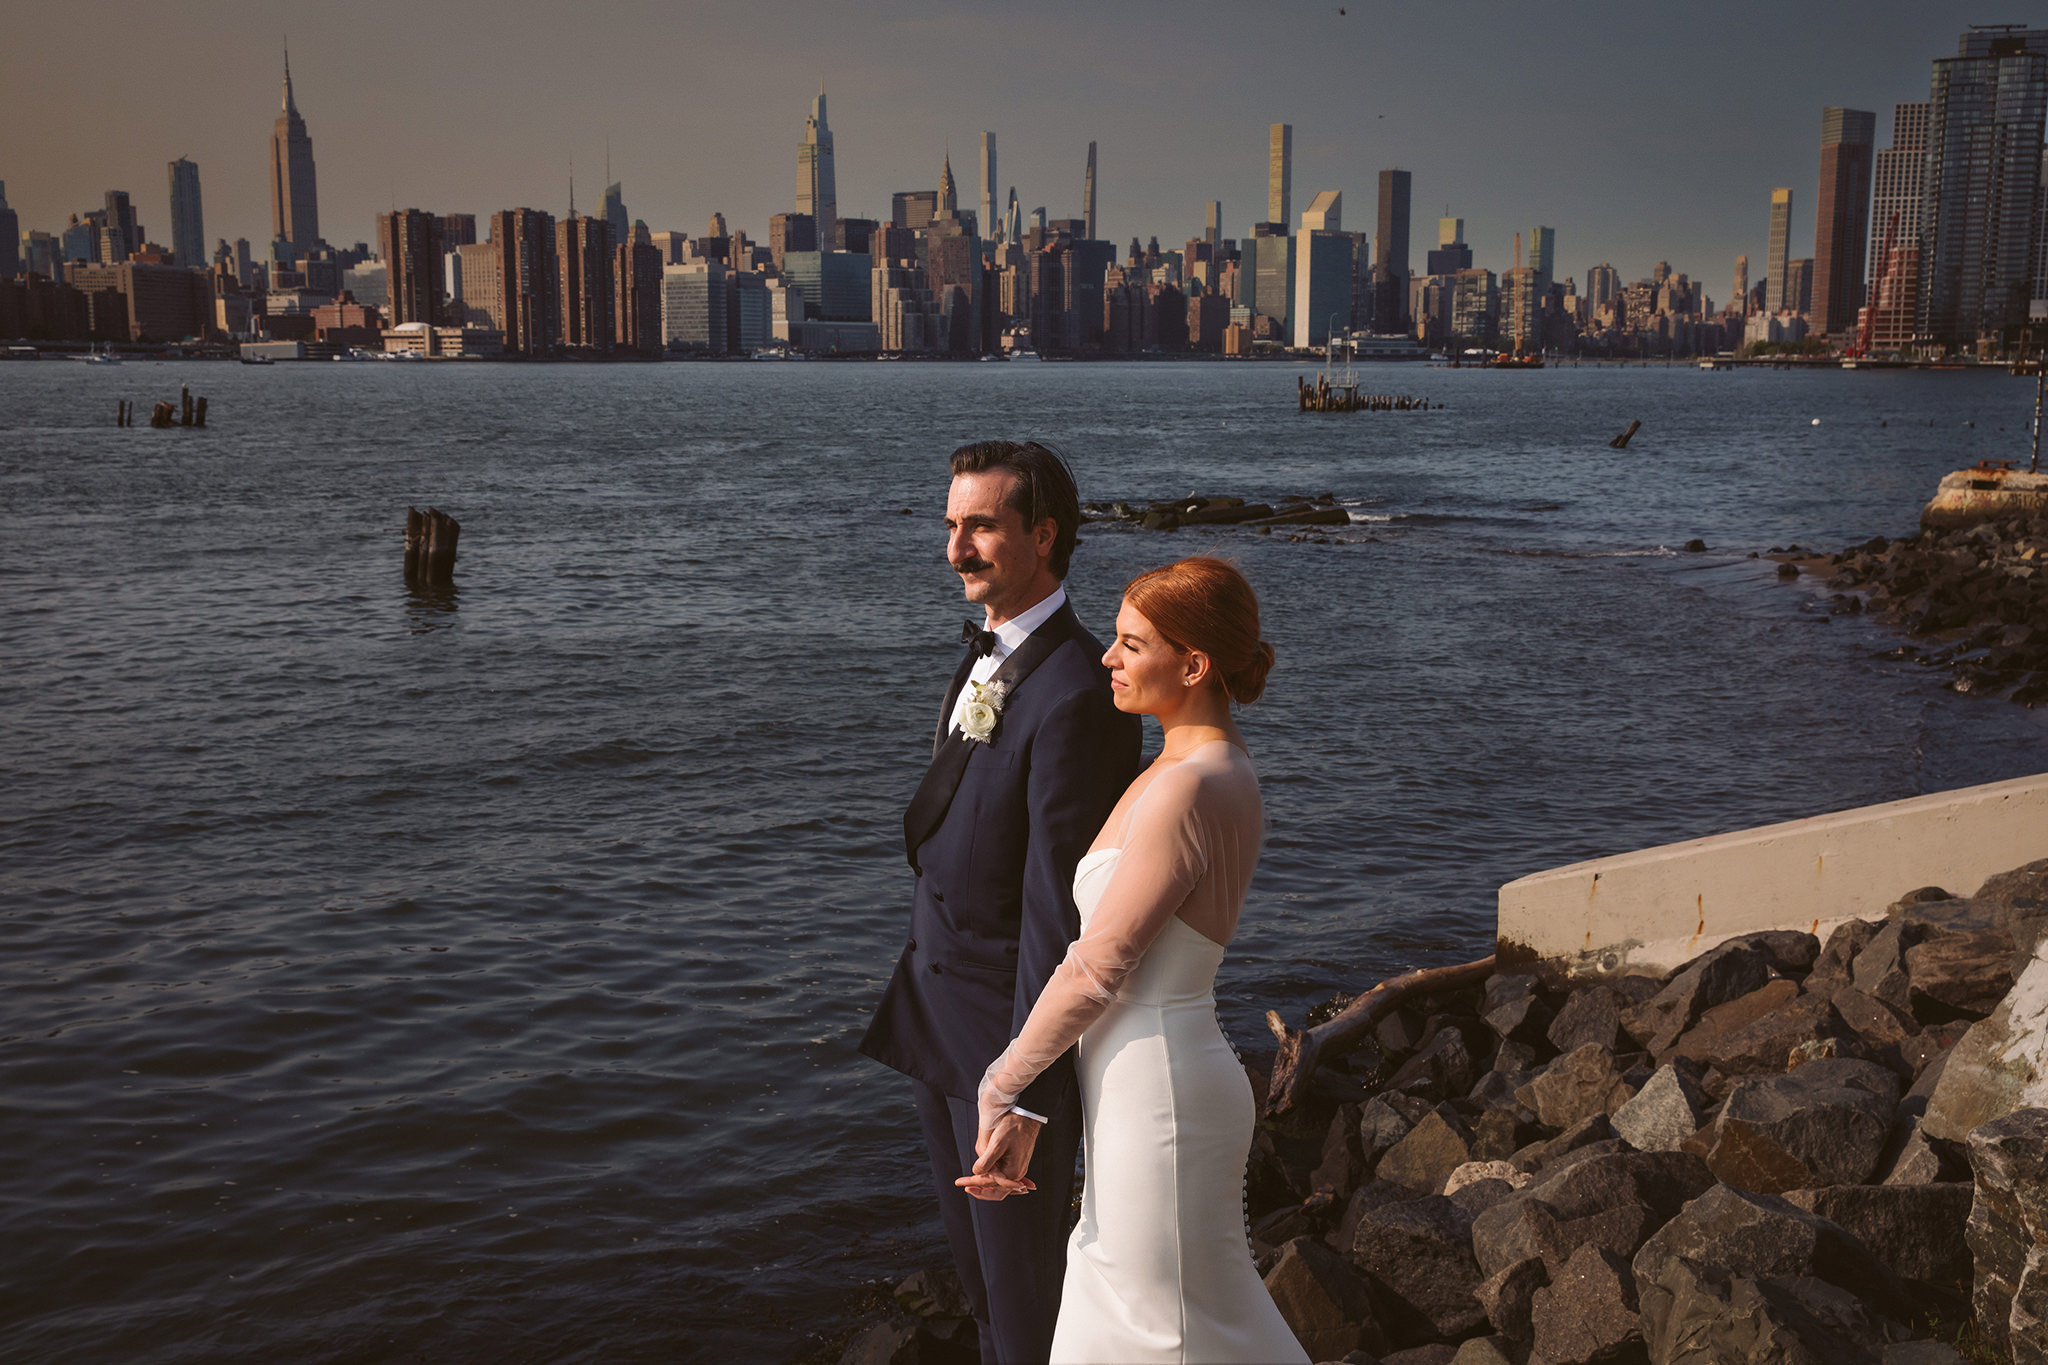 A wedding photo along the river in Brooklyn, New York